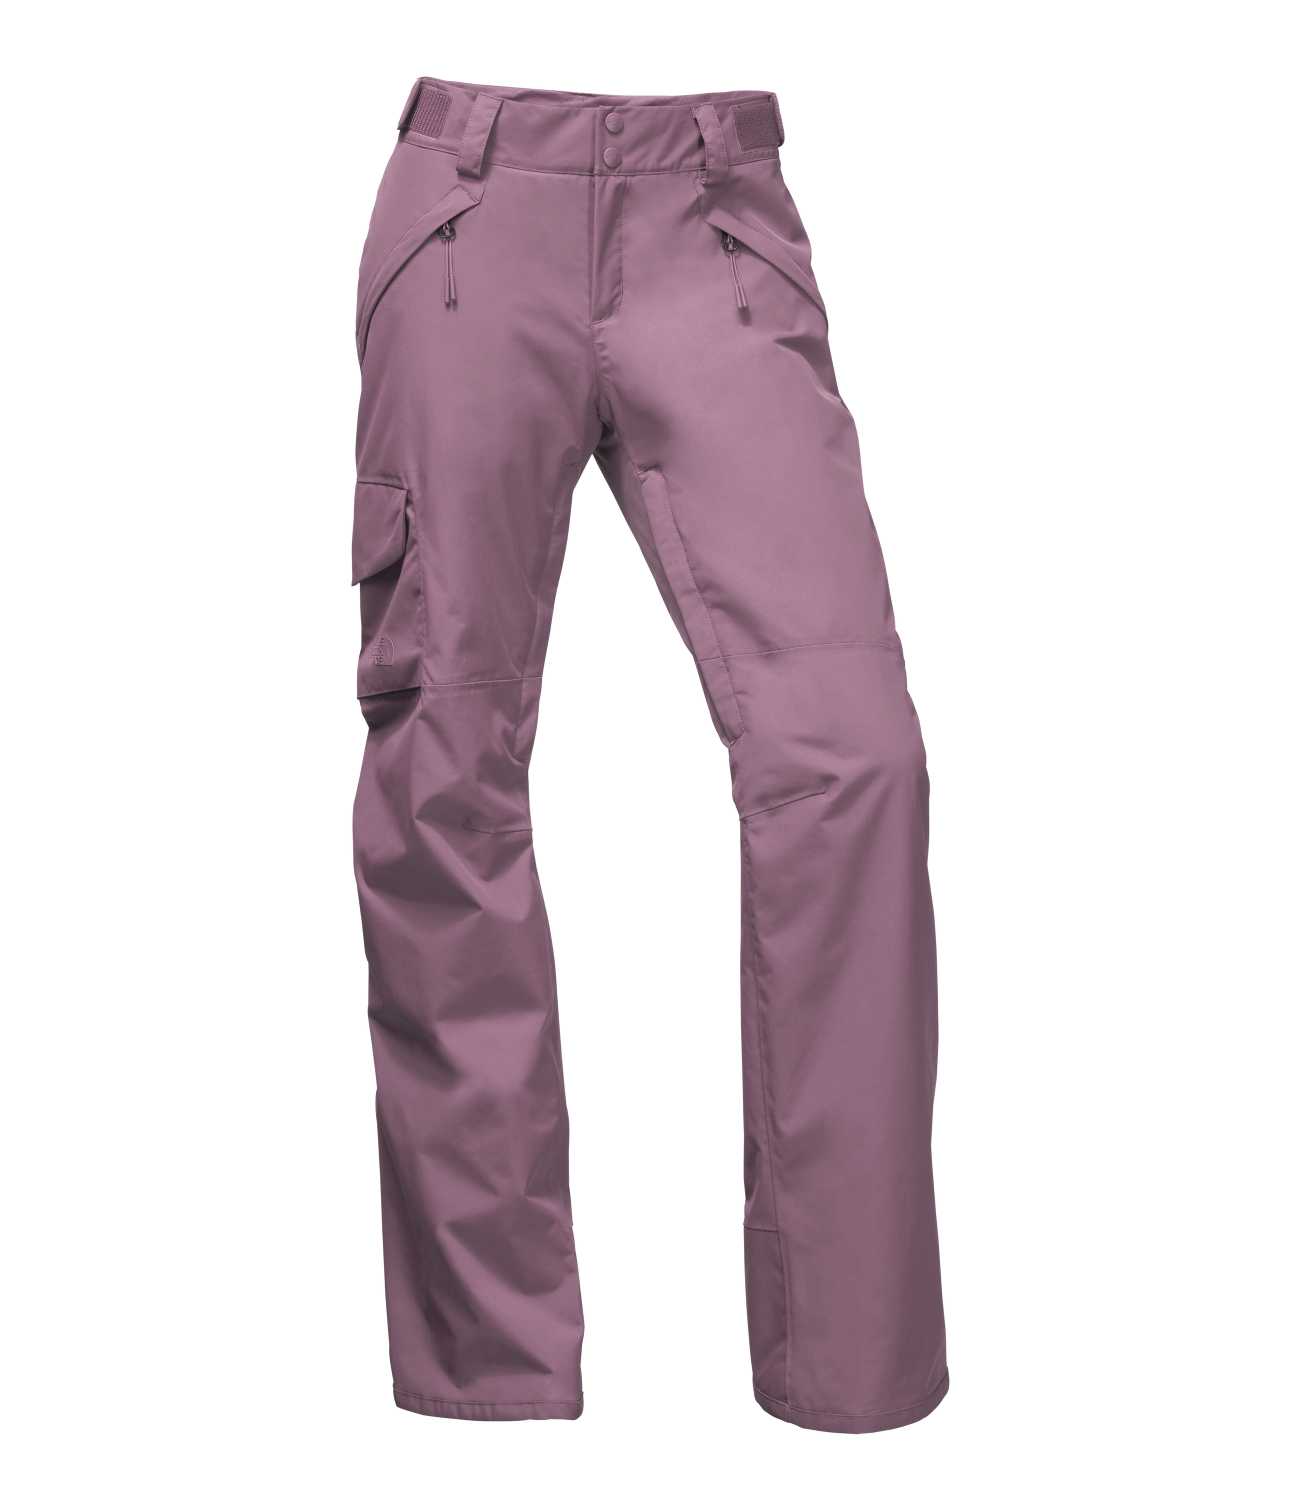 Women's Freedom Pant Insulated - TNF Black - Ramsey Outdoor